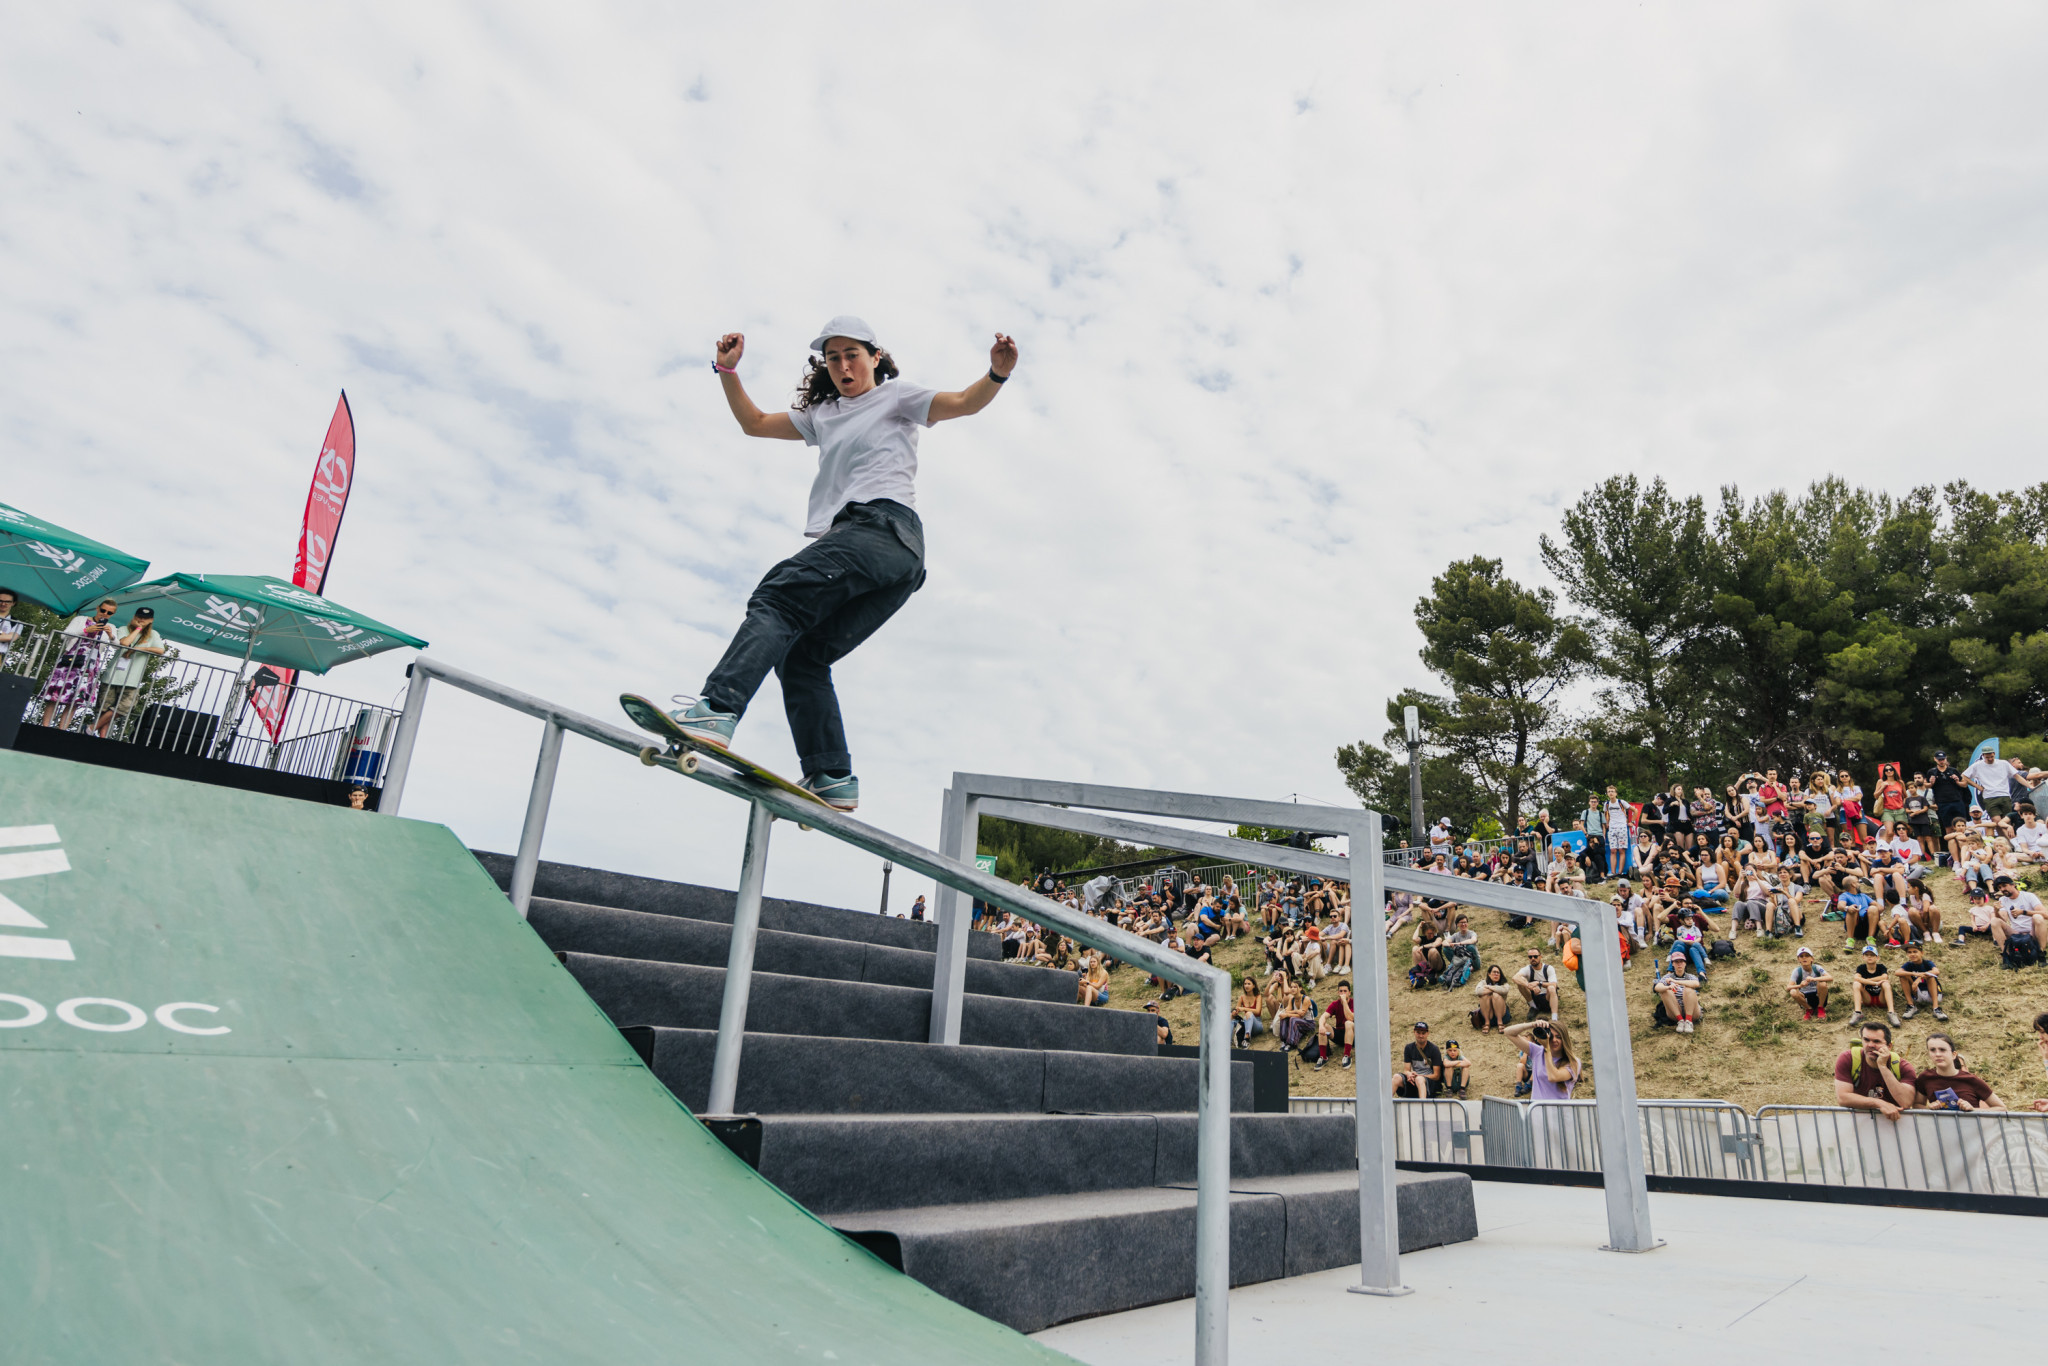 Hym pulls off confident street skateboard victory at FISE prior to Paris 2024 qualifying